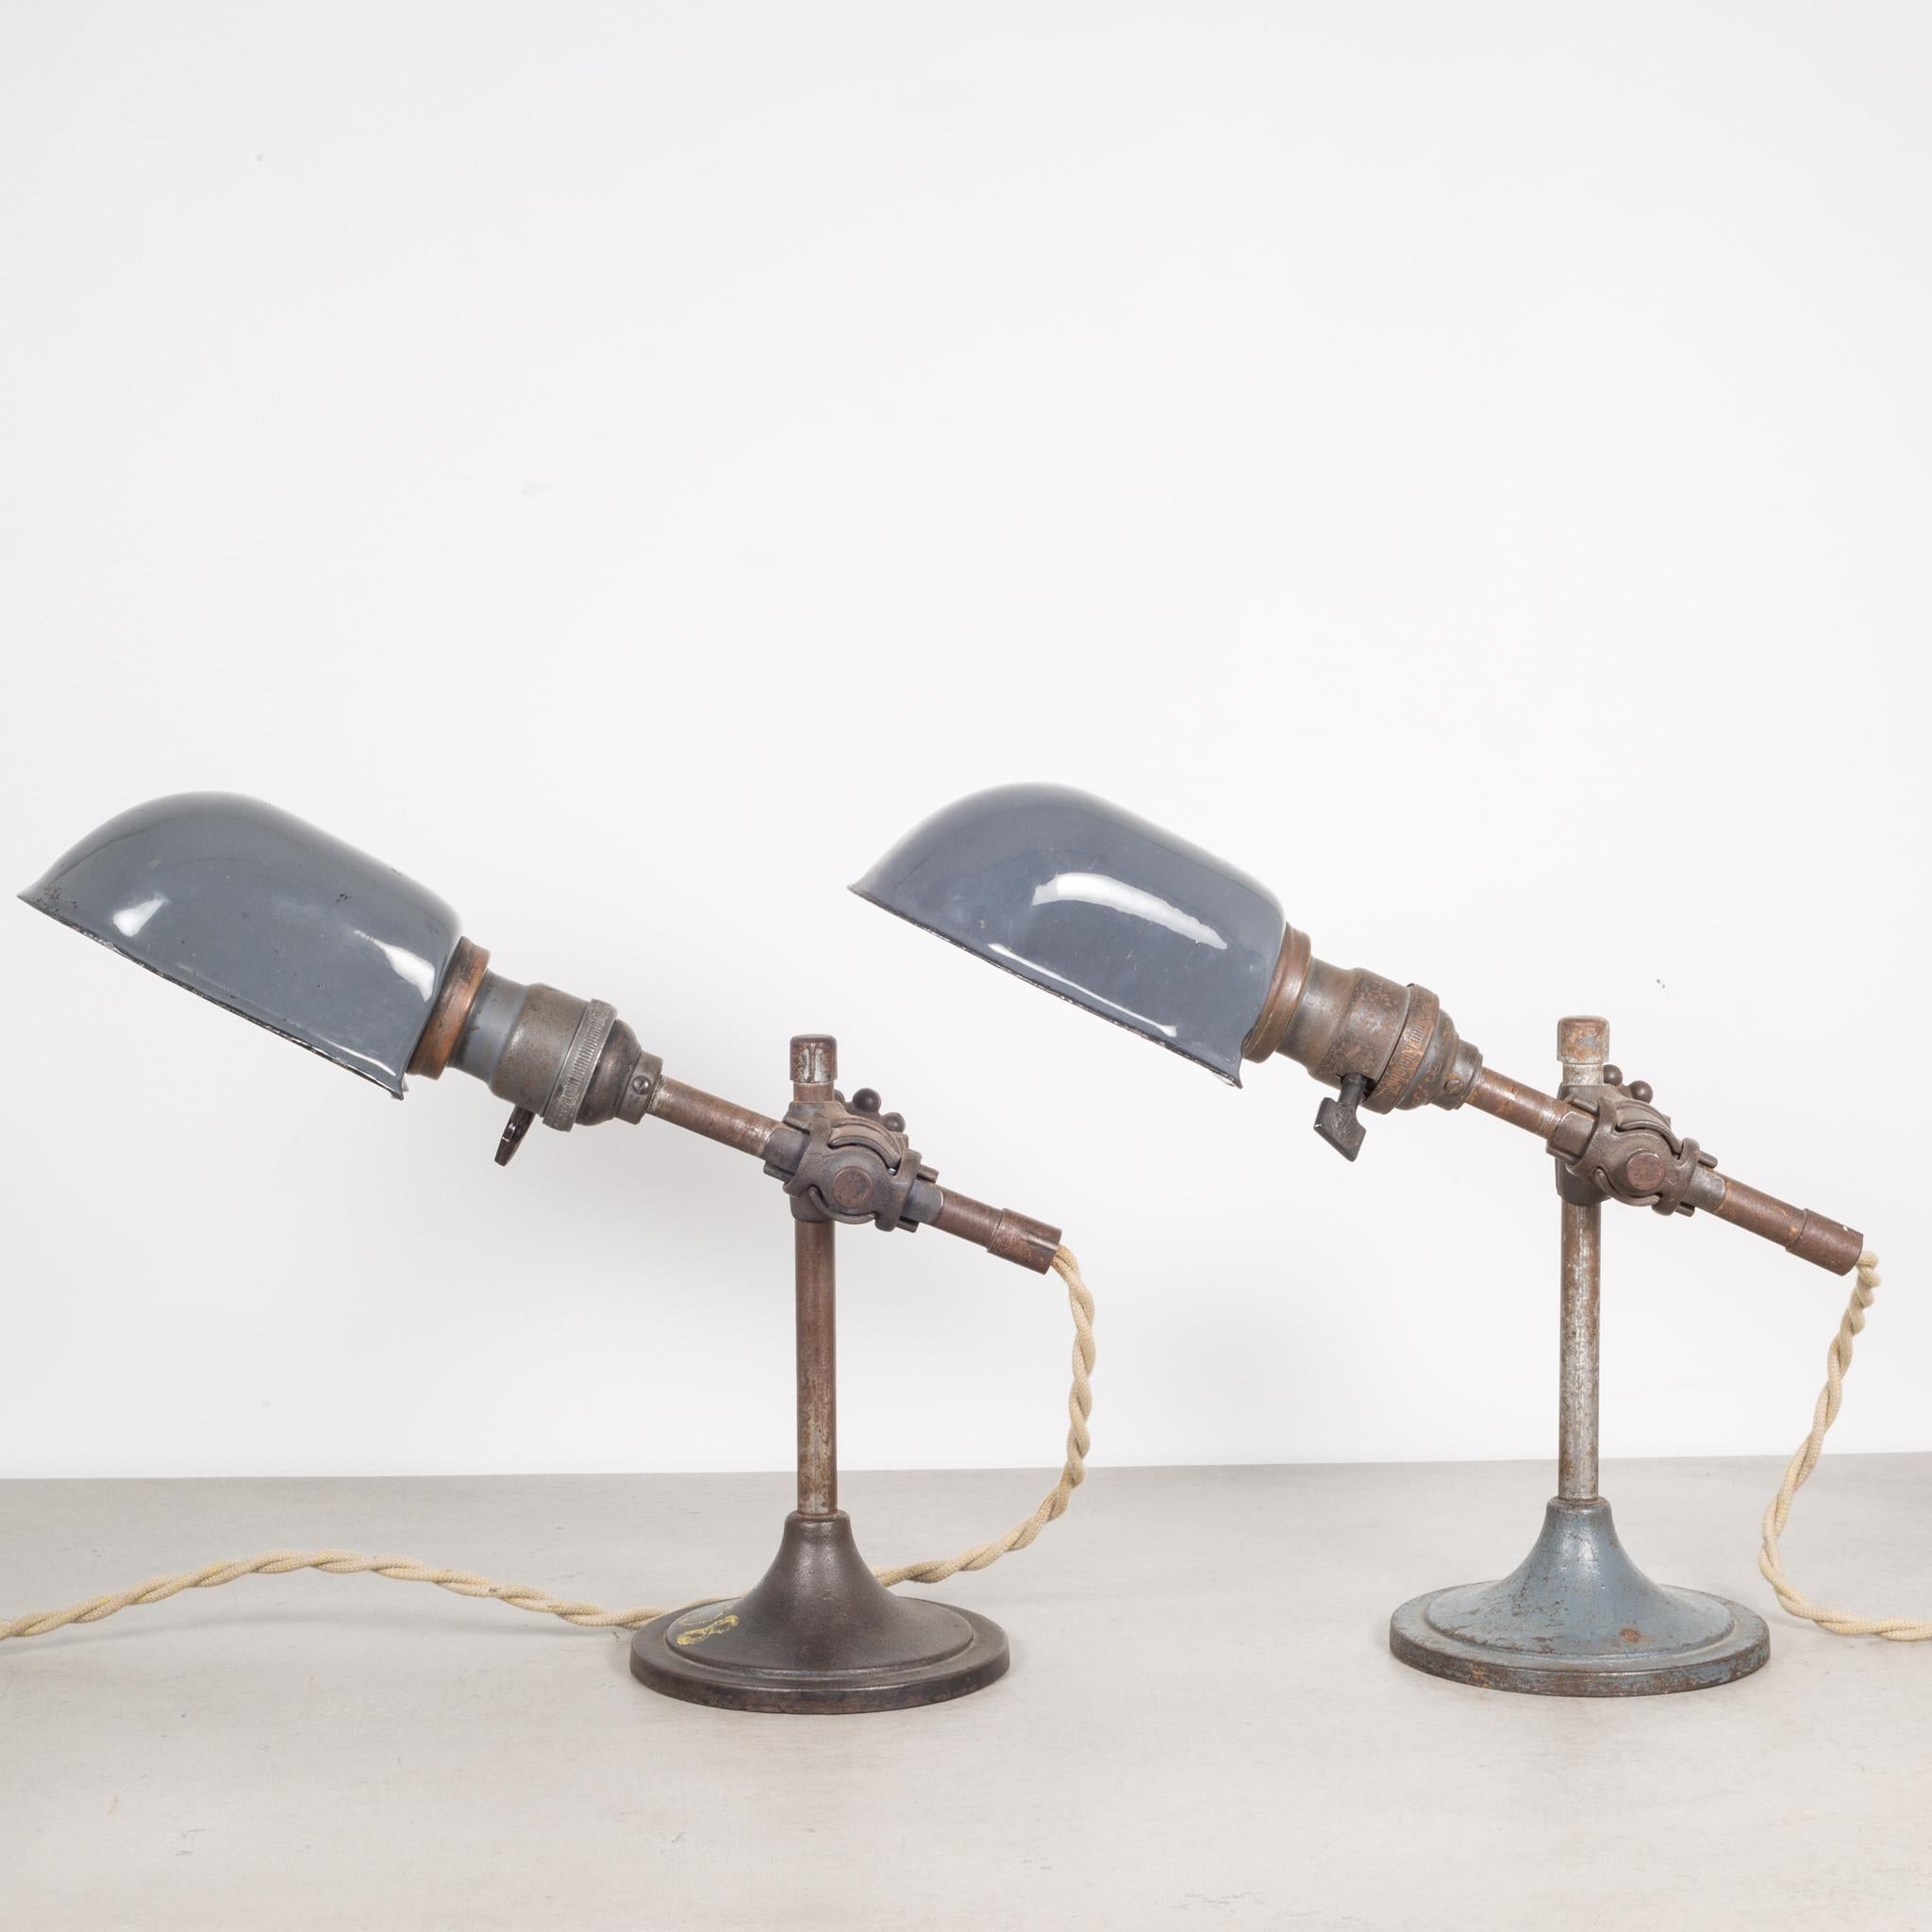 About

One has sold, one is avaialbe. 

An industrial task lamp with porcelain shade, iron base and fabric cord. Fully adjustable, the shade tilst and the height can be raised up and down. This piece has retained its original finish and works